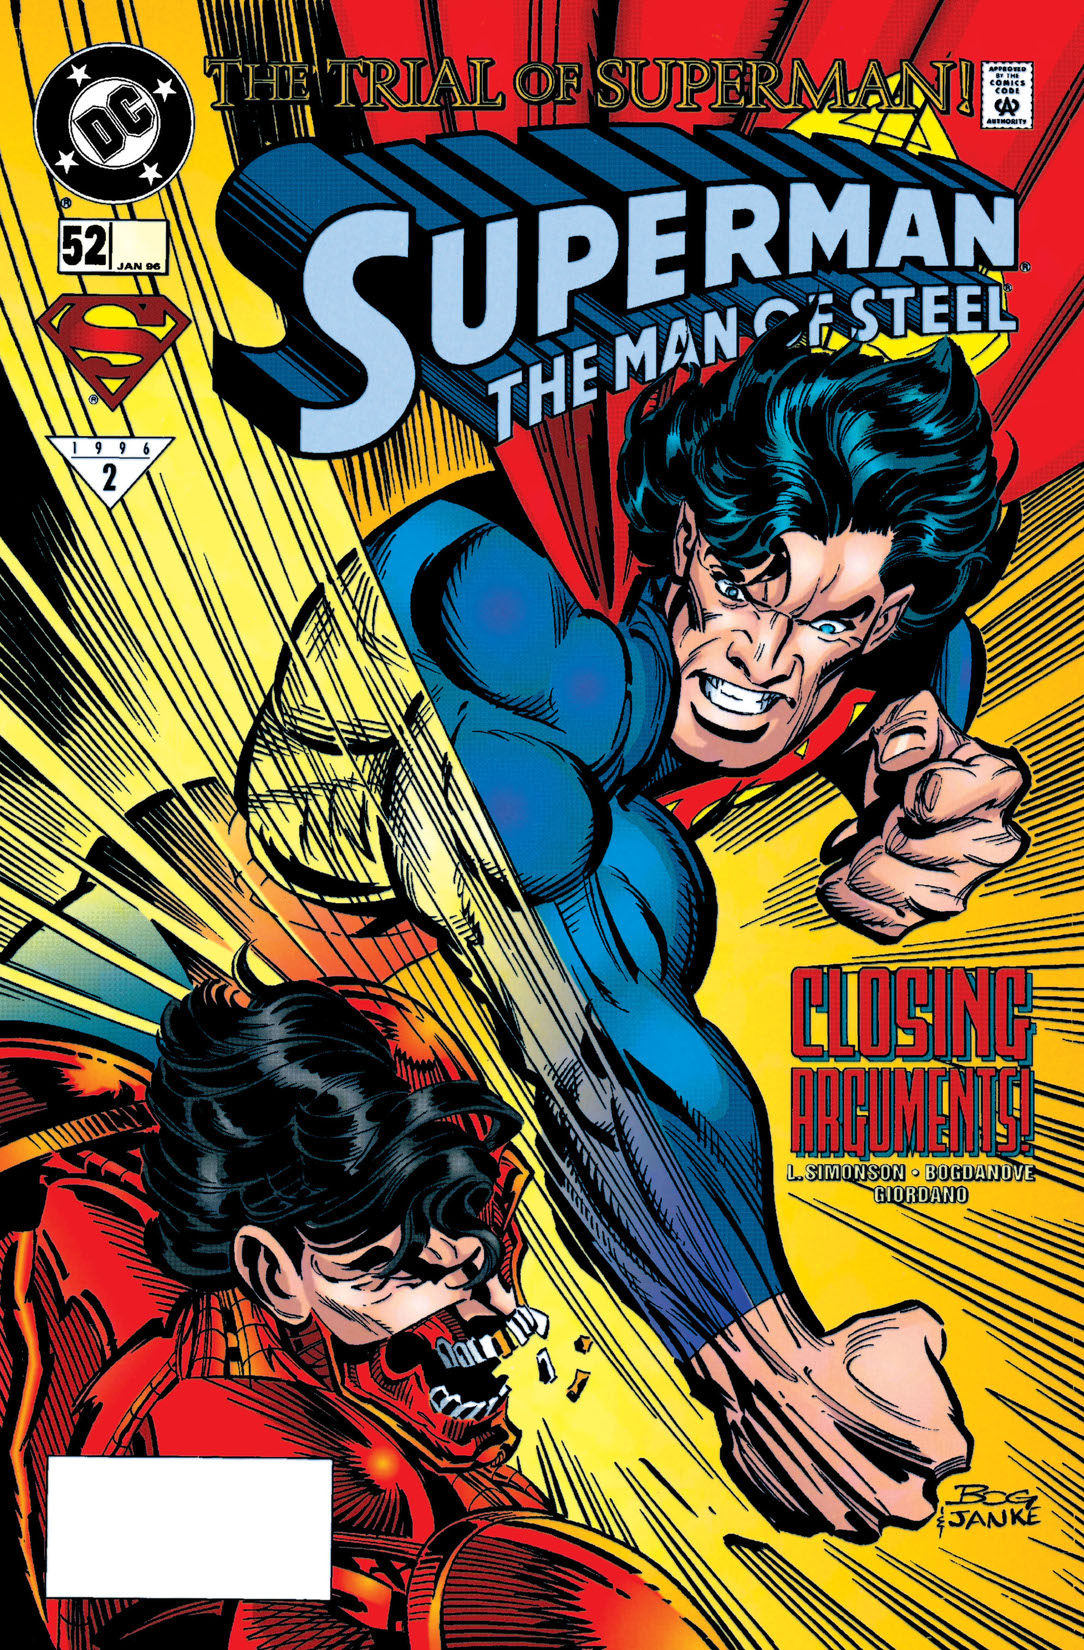 Superman: The Man of Steel #52 preview images